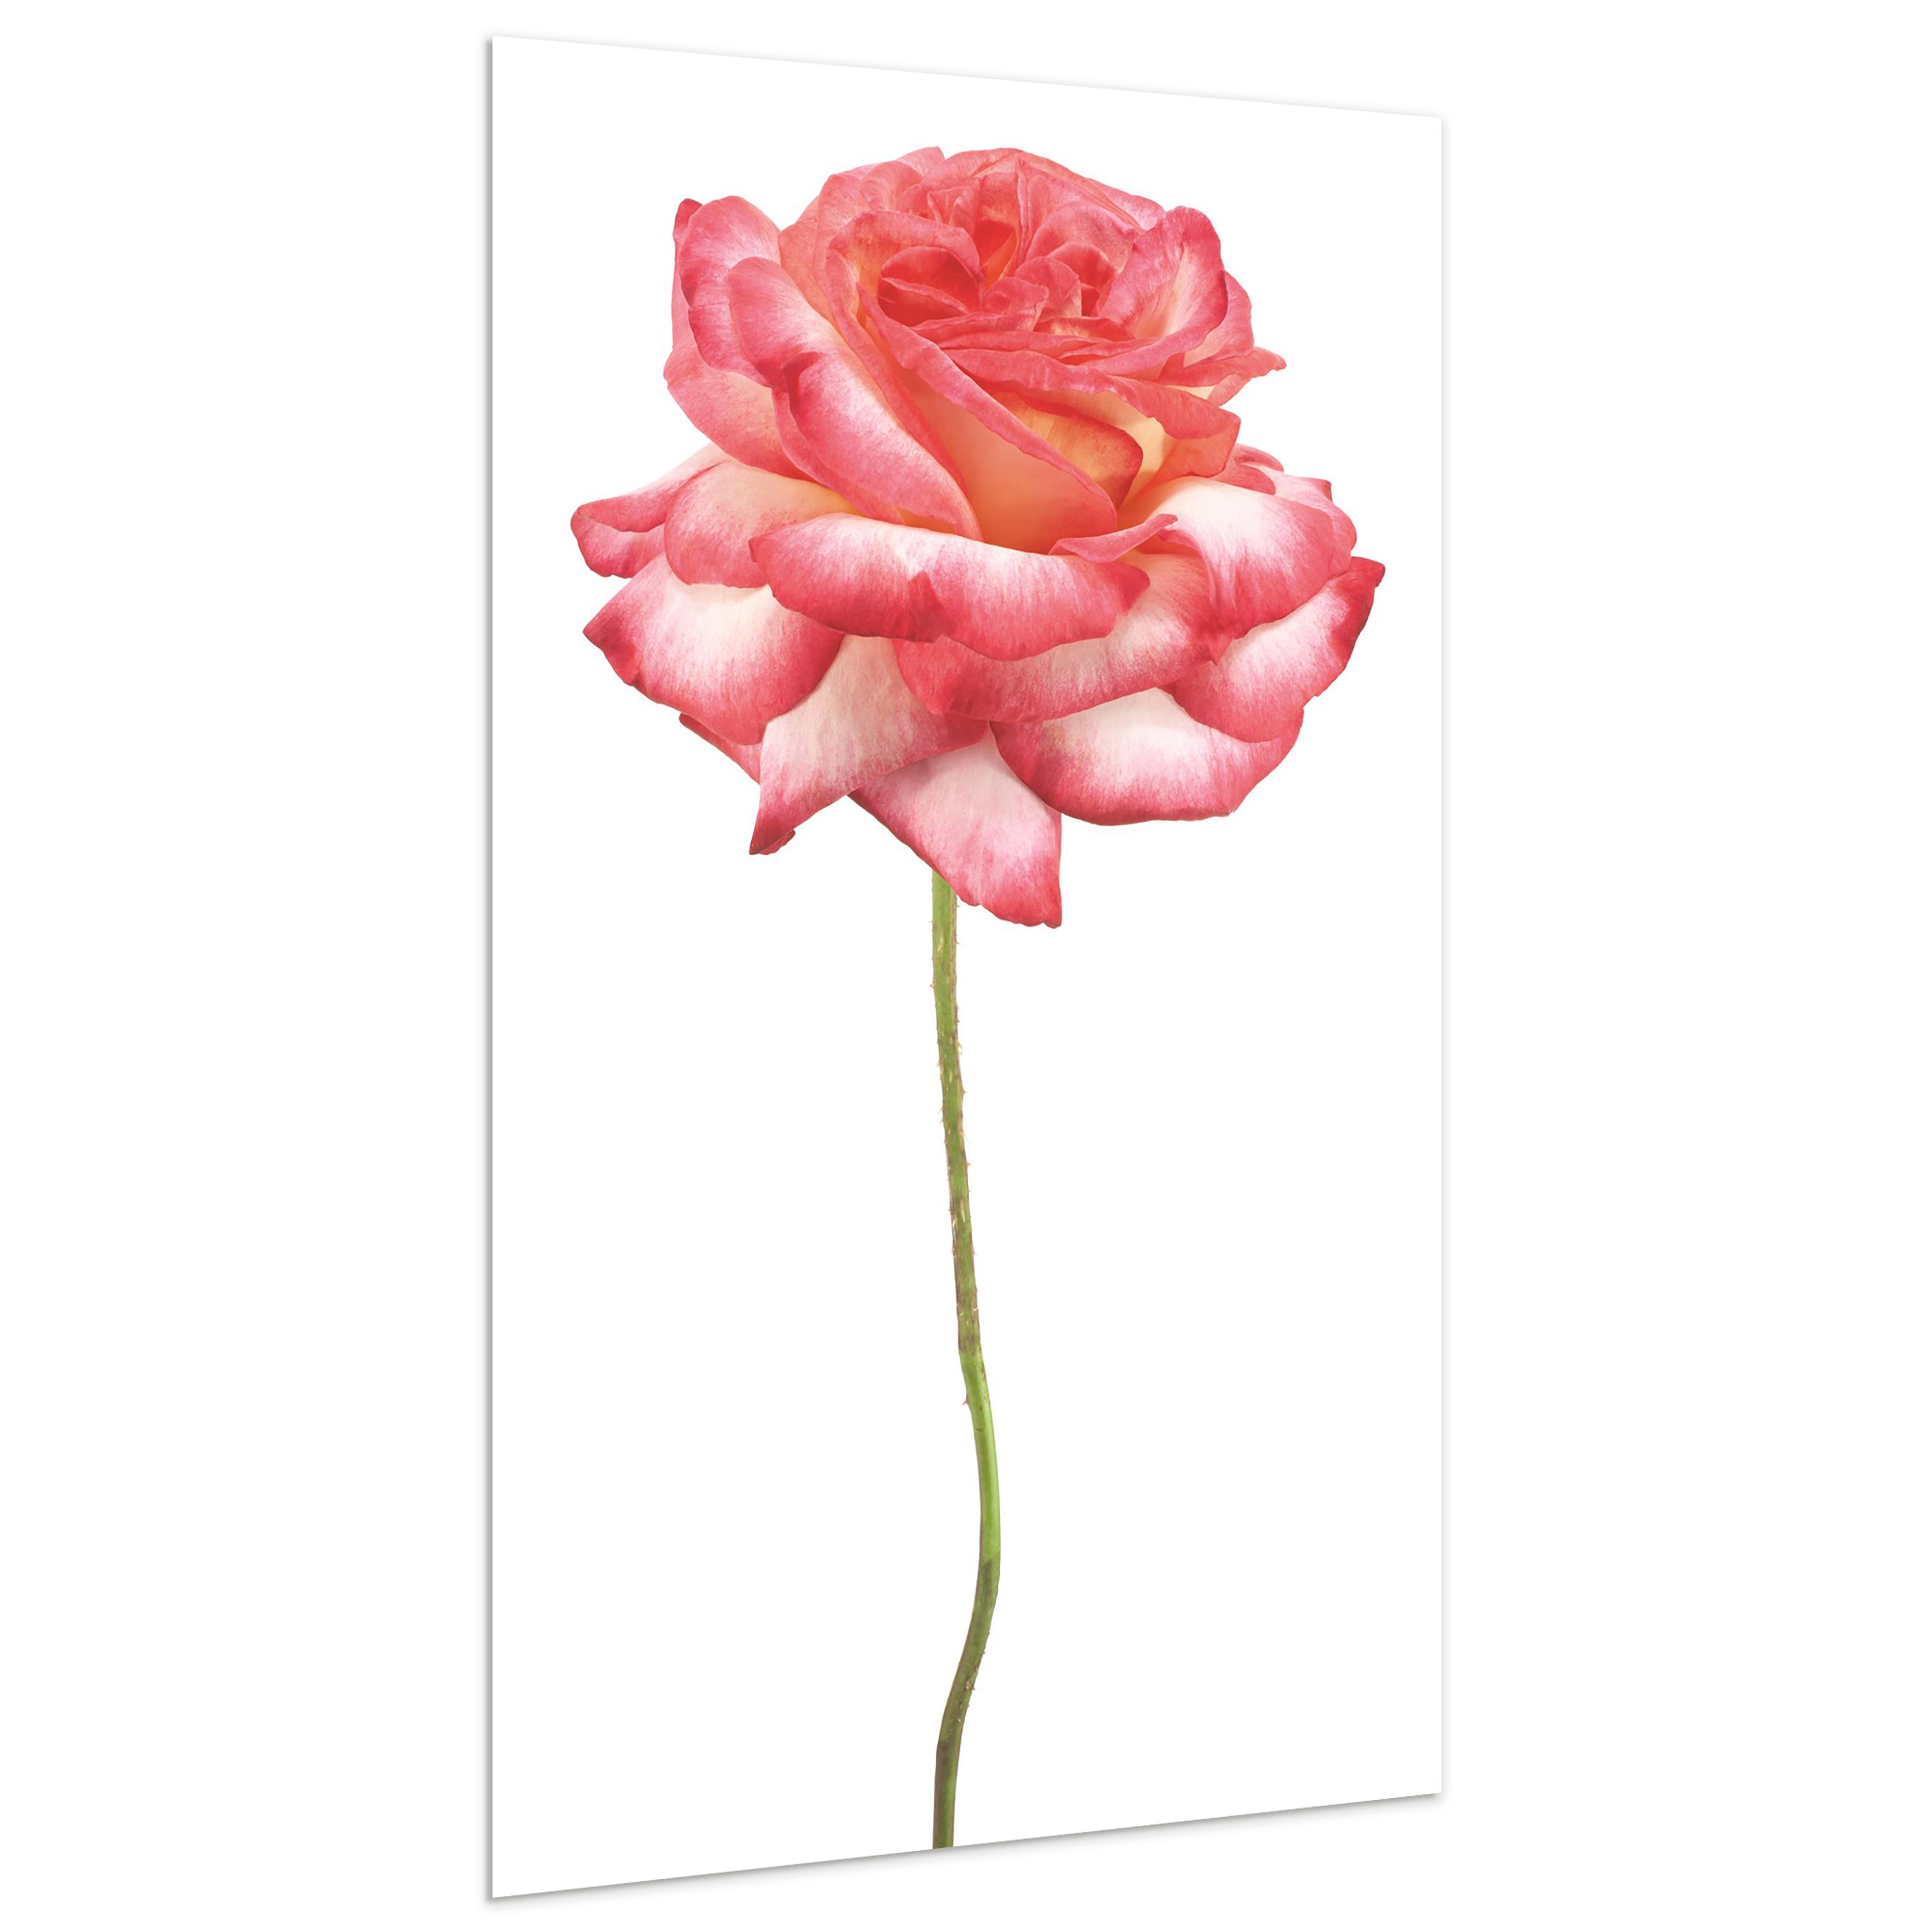 Empire Art Direct Rose Pink Rose On White On Glass Print